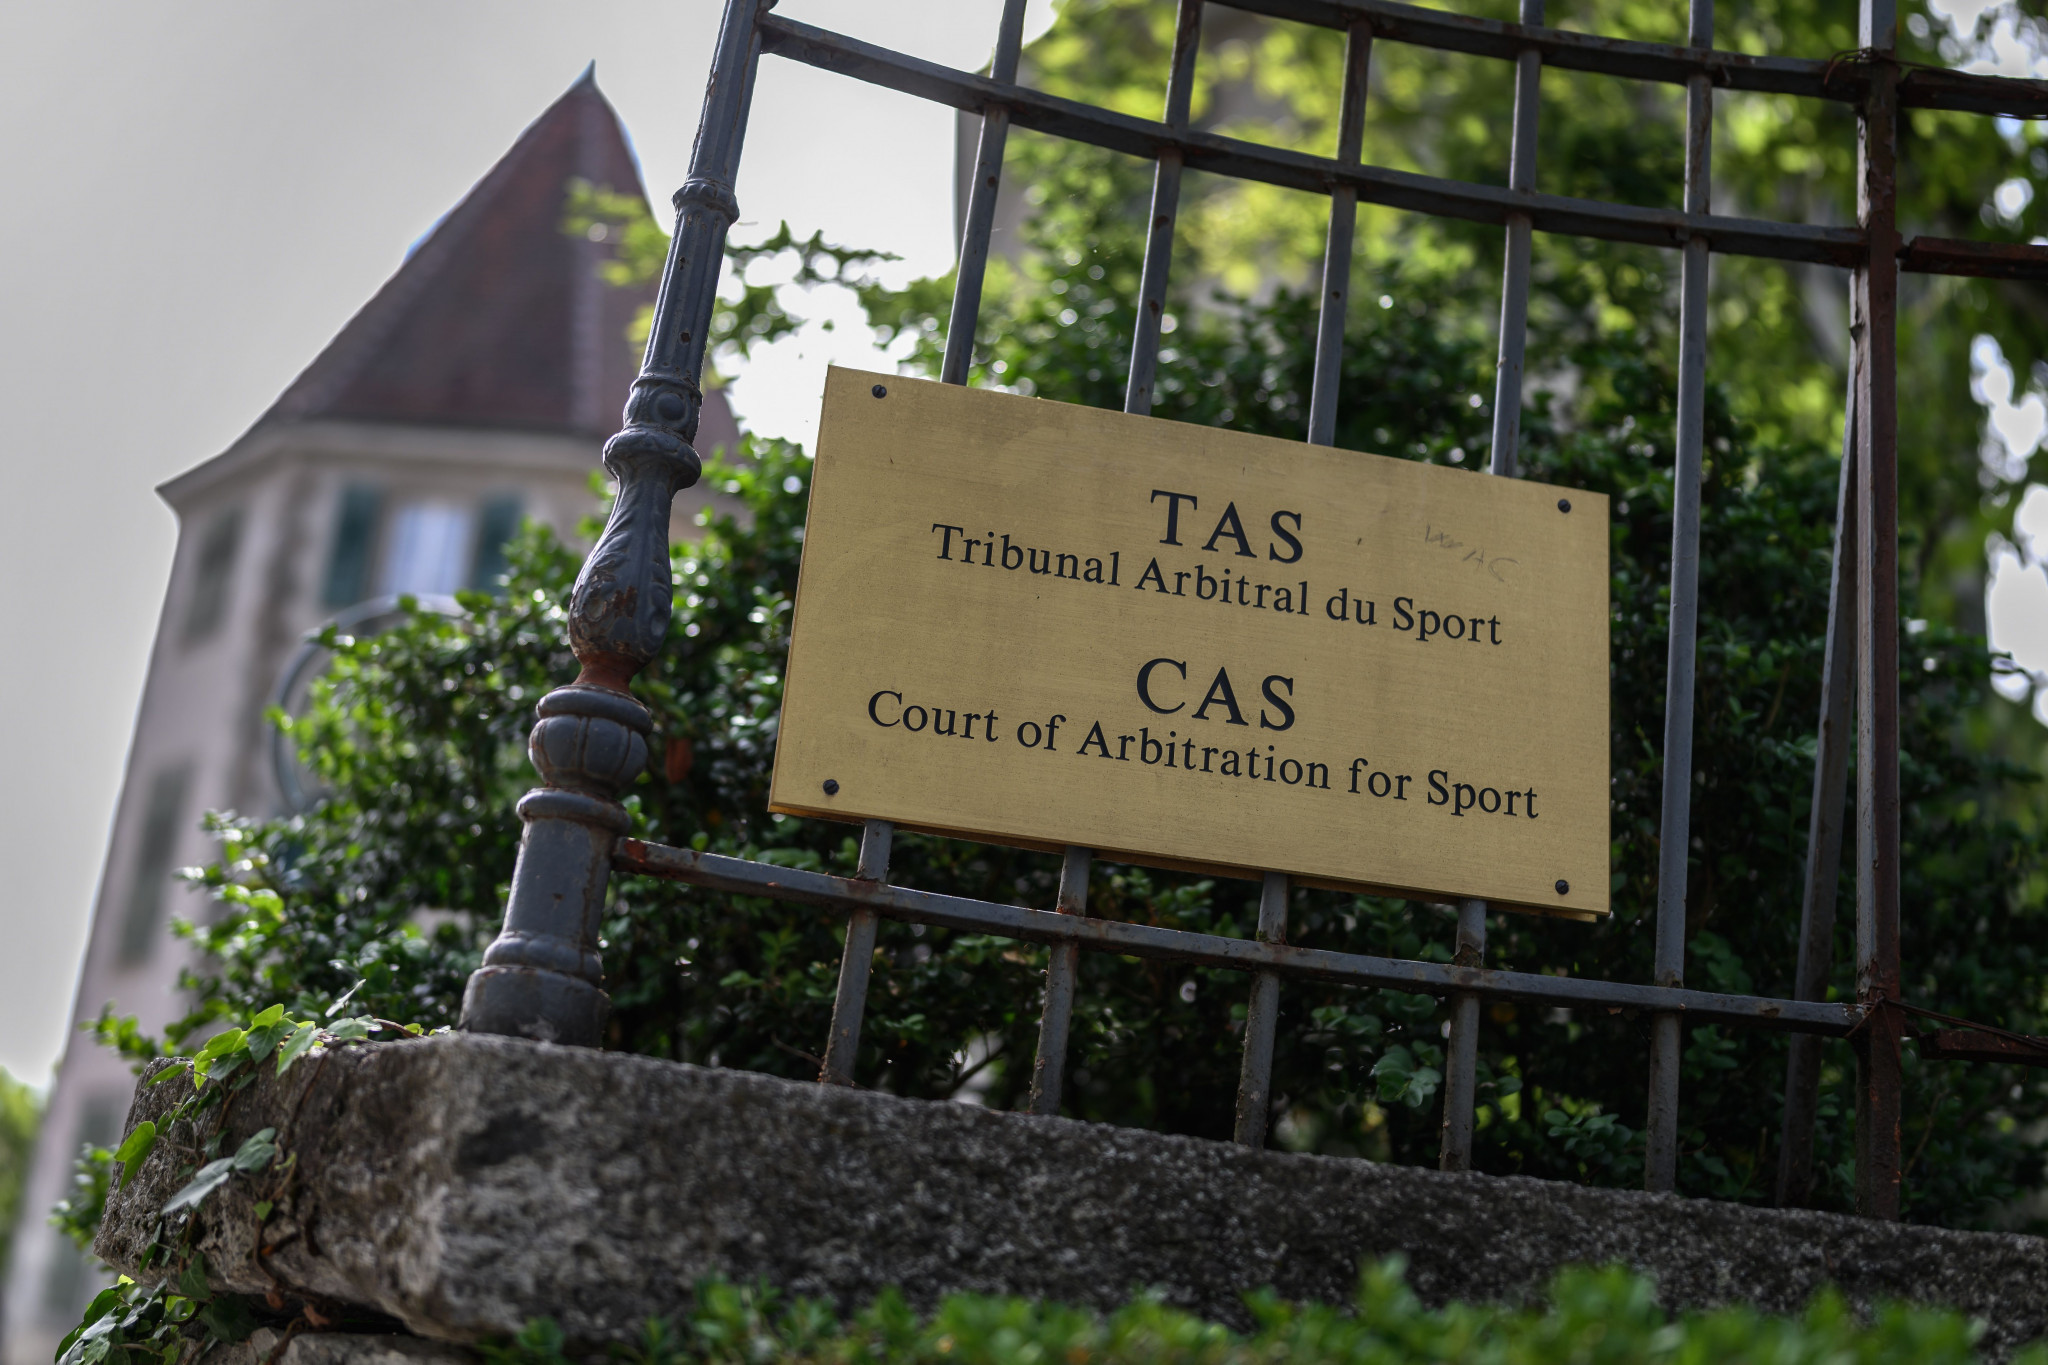 The Court of Arbitration for Sport has hit back at WADA following criticism in the independent observers report from Tokyo 2020 ©Getty Images